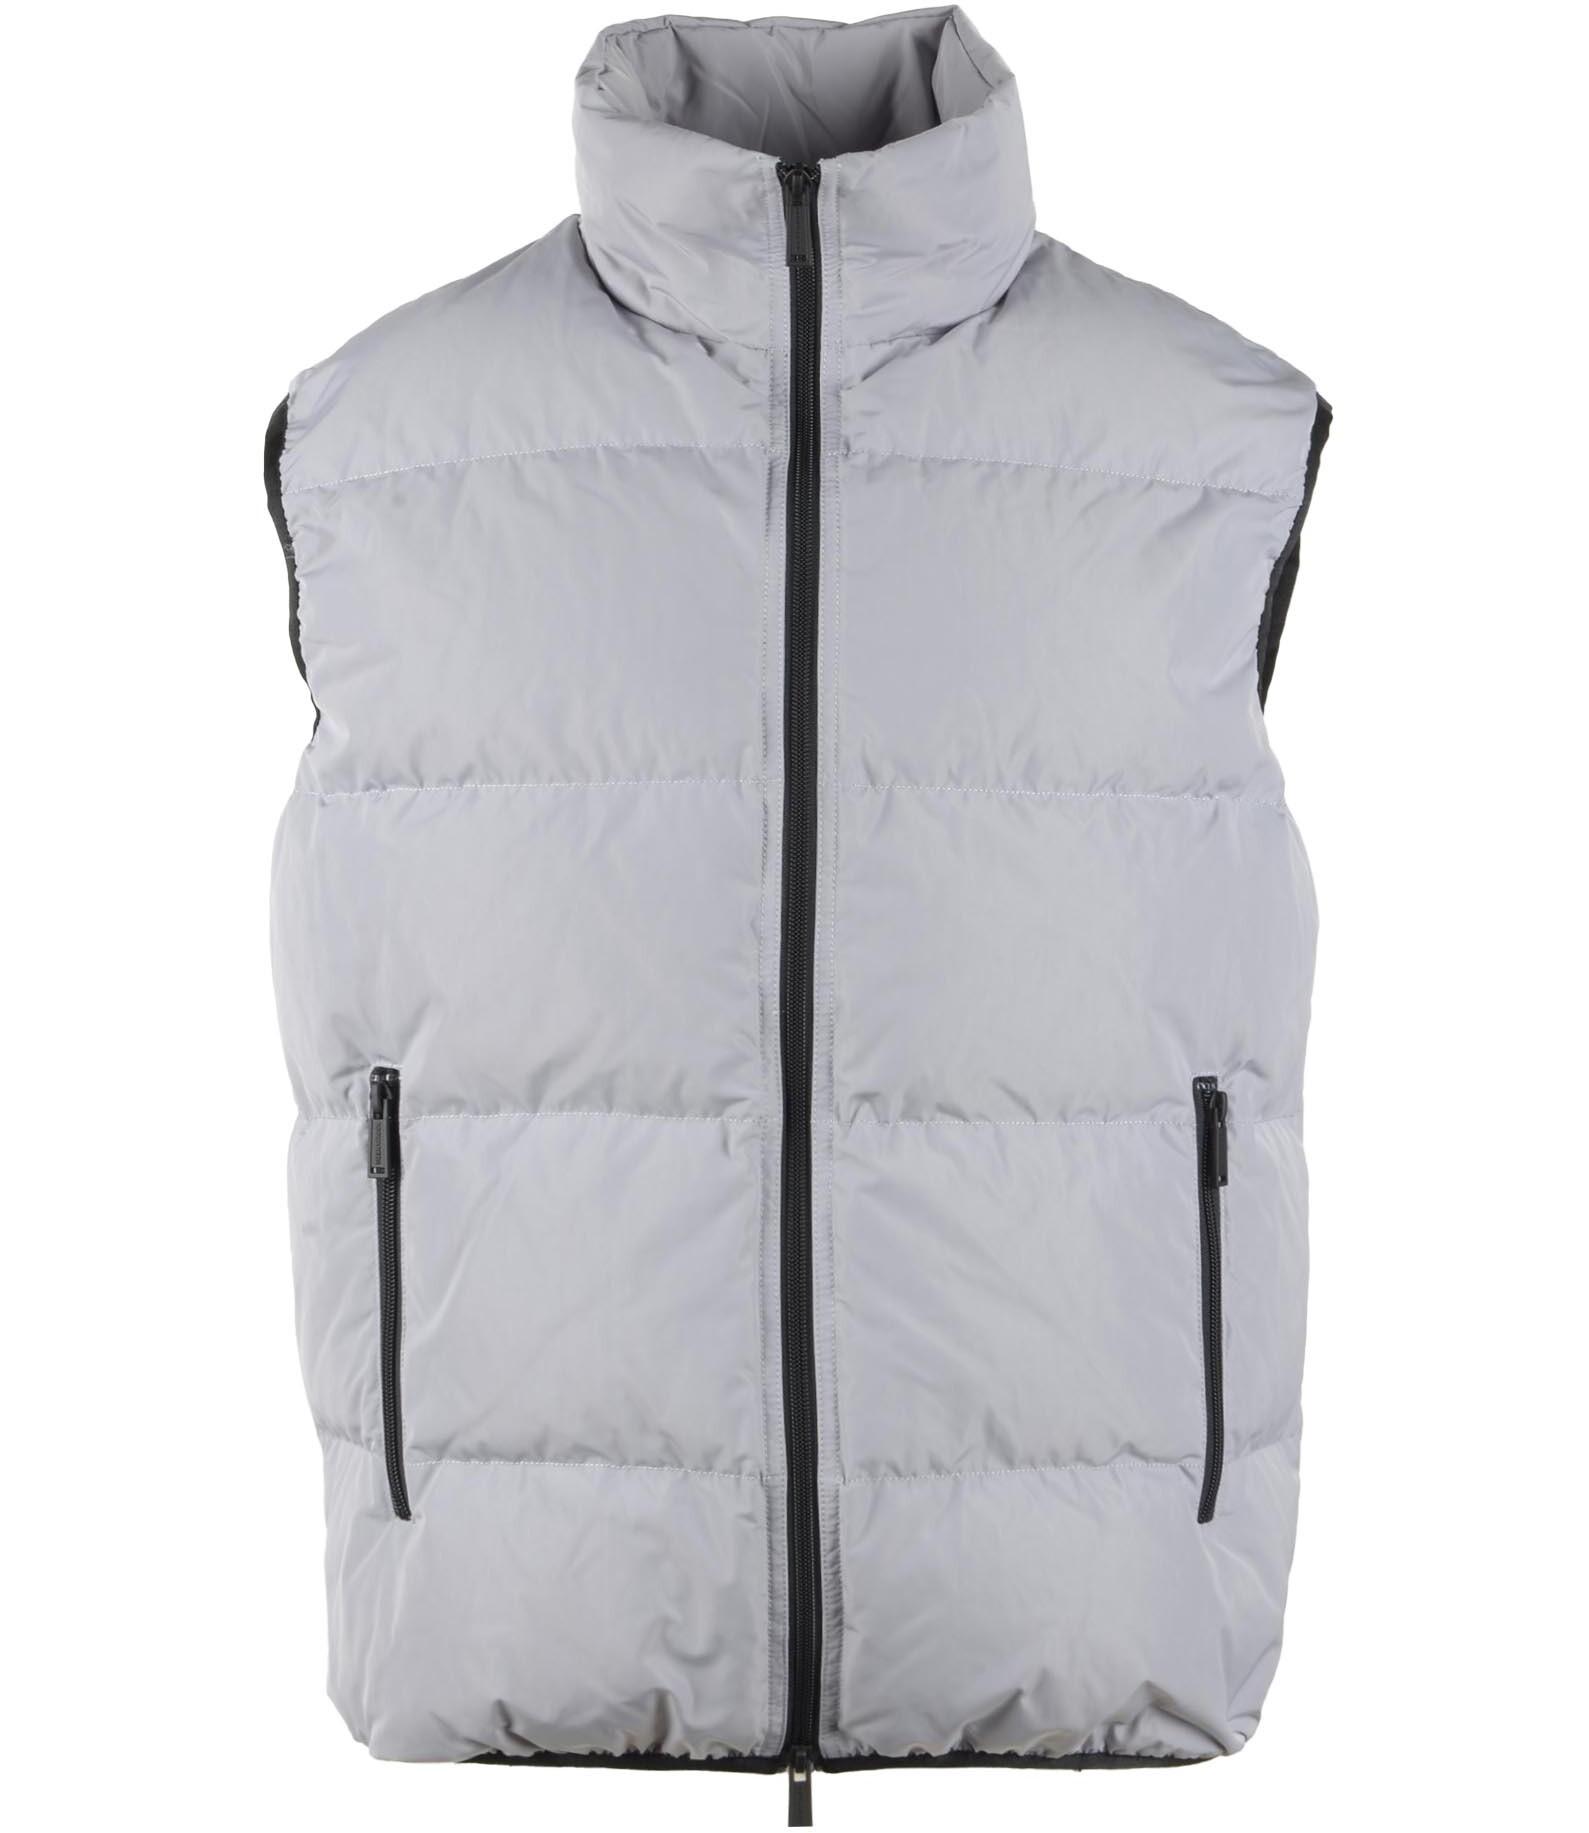 DSquared2 Light Vest 48 at FORZIERI